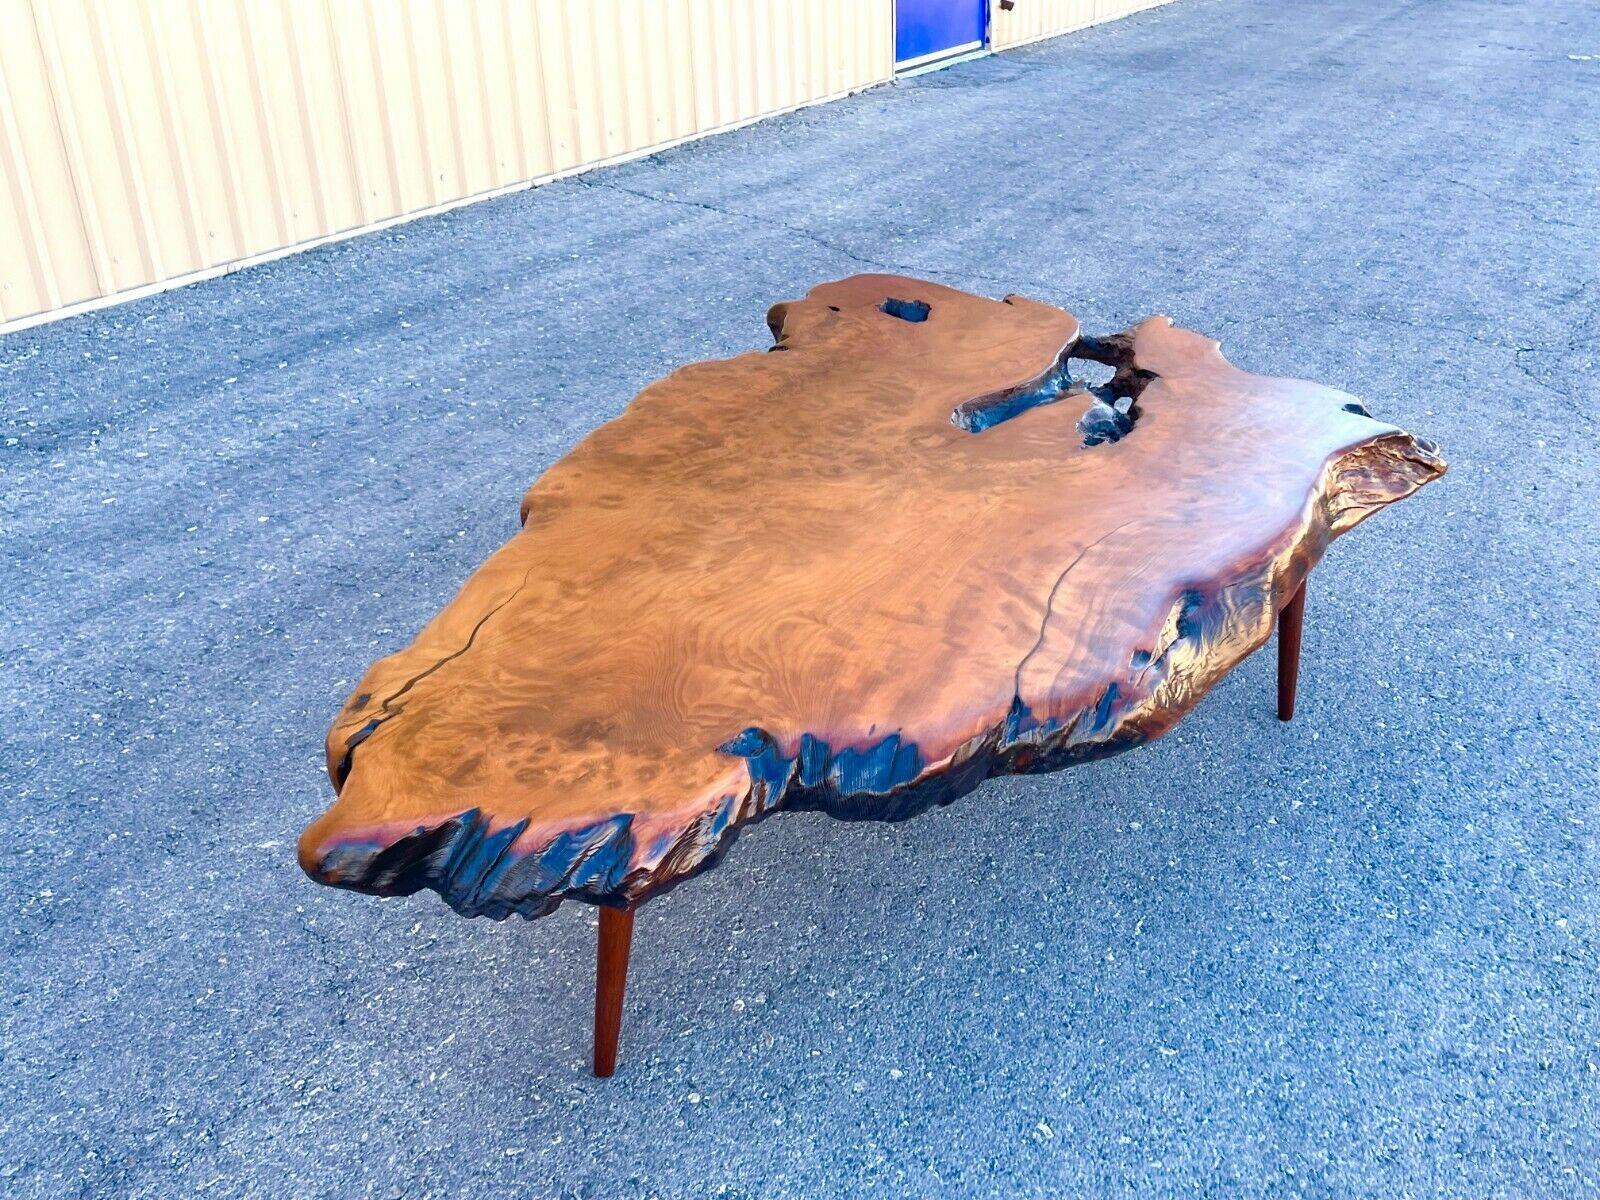 A very striking and substantial 1960's/ 1970's mid century live edge redwood burl wood slab coffee table on 15 inch walnut legs. Impressive 5' 9 